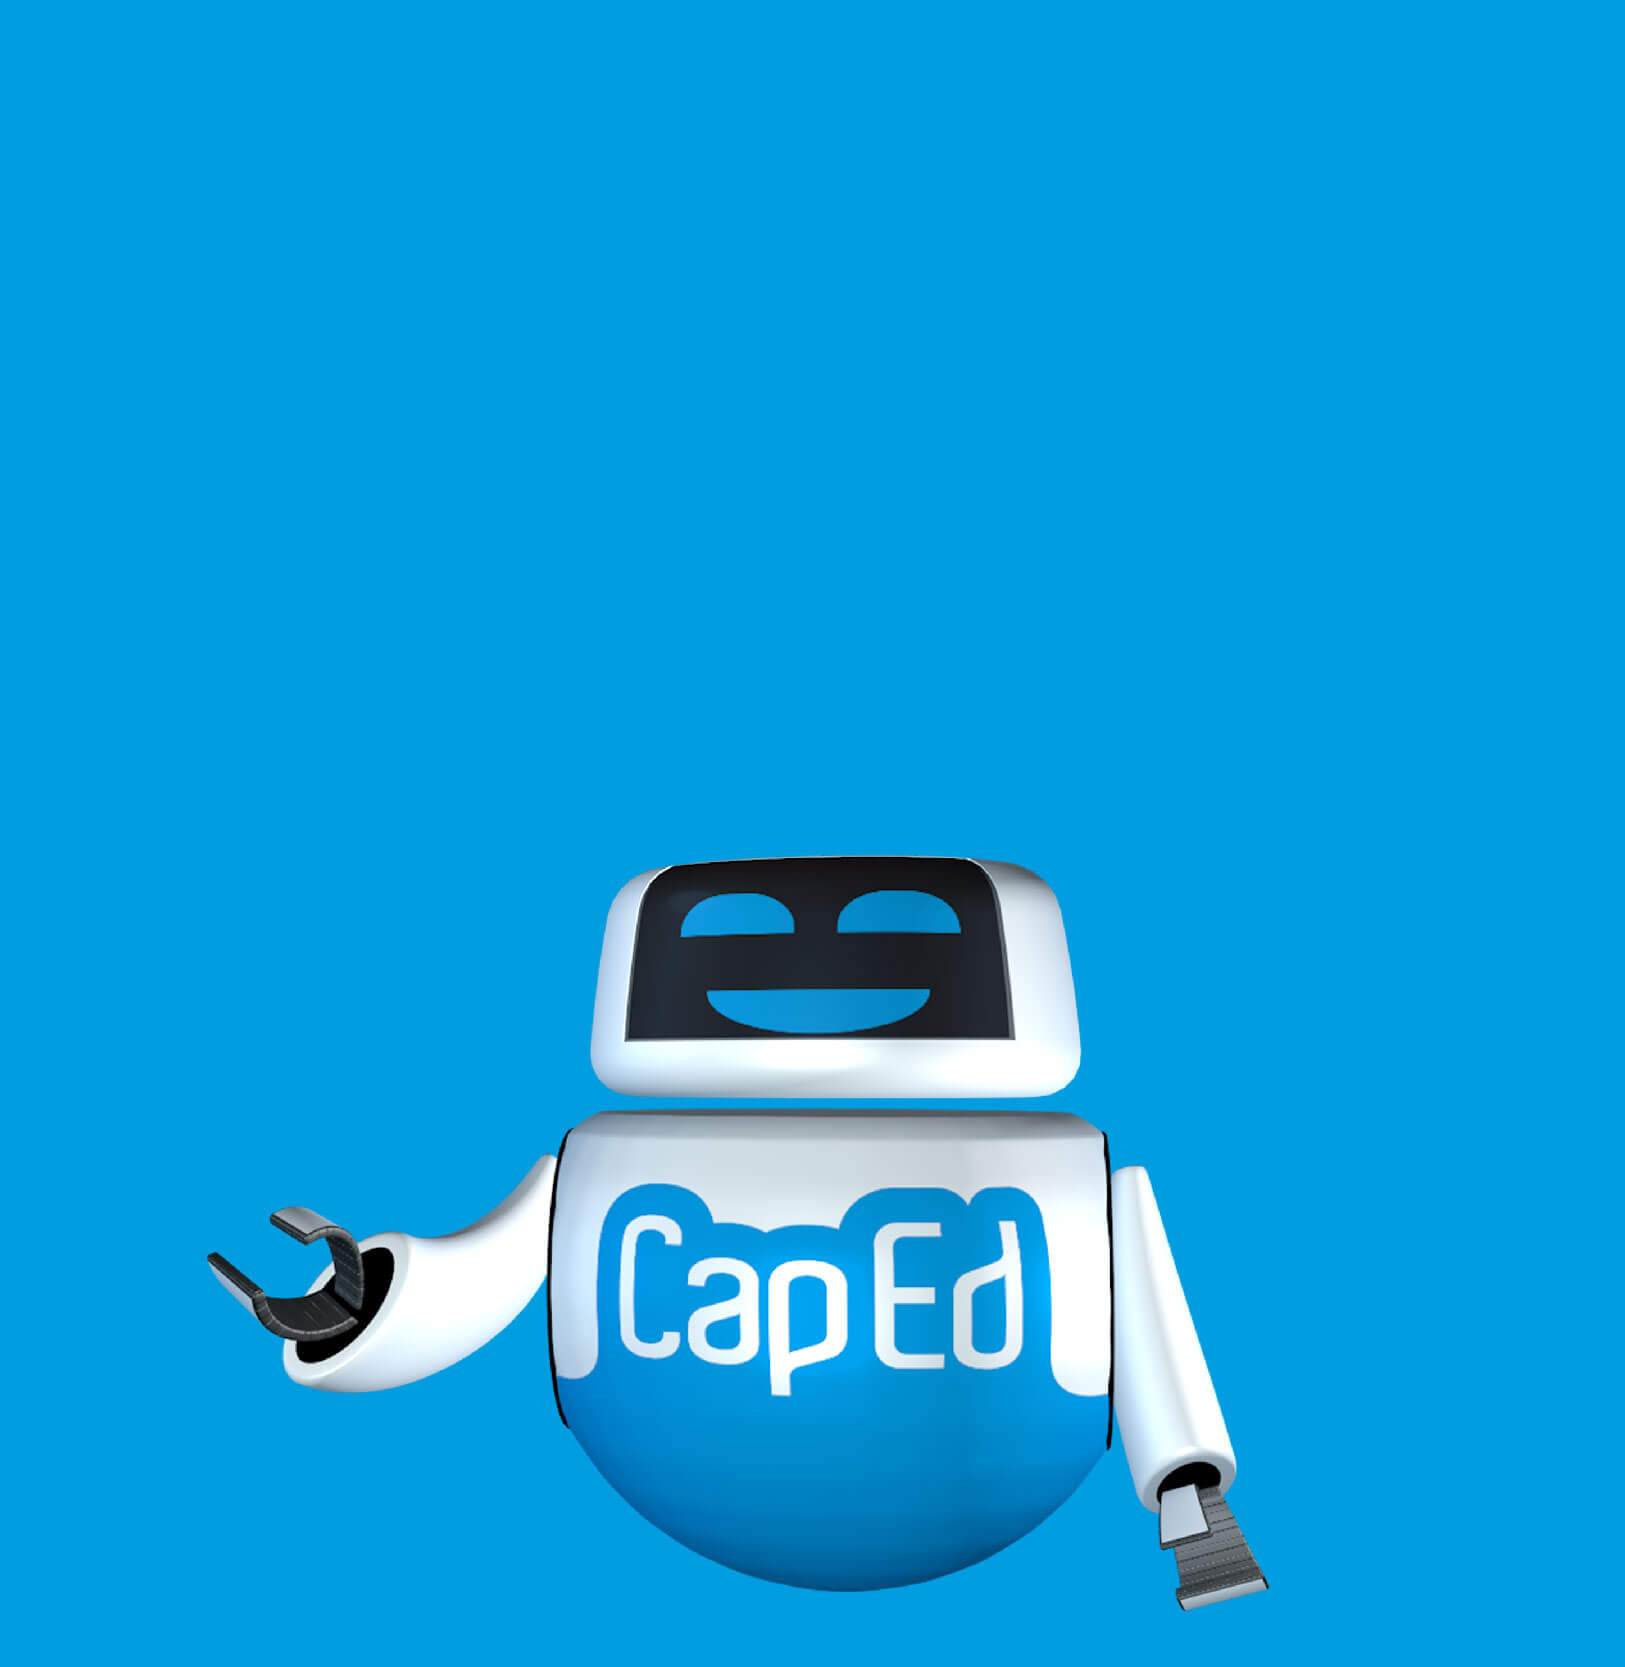 Eddy the robot, CapEd's virtual assistant.